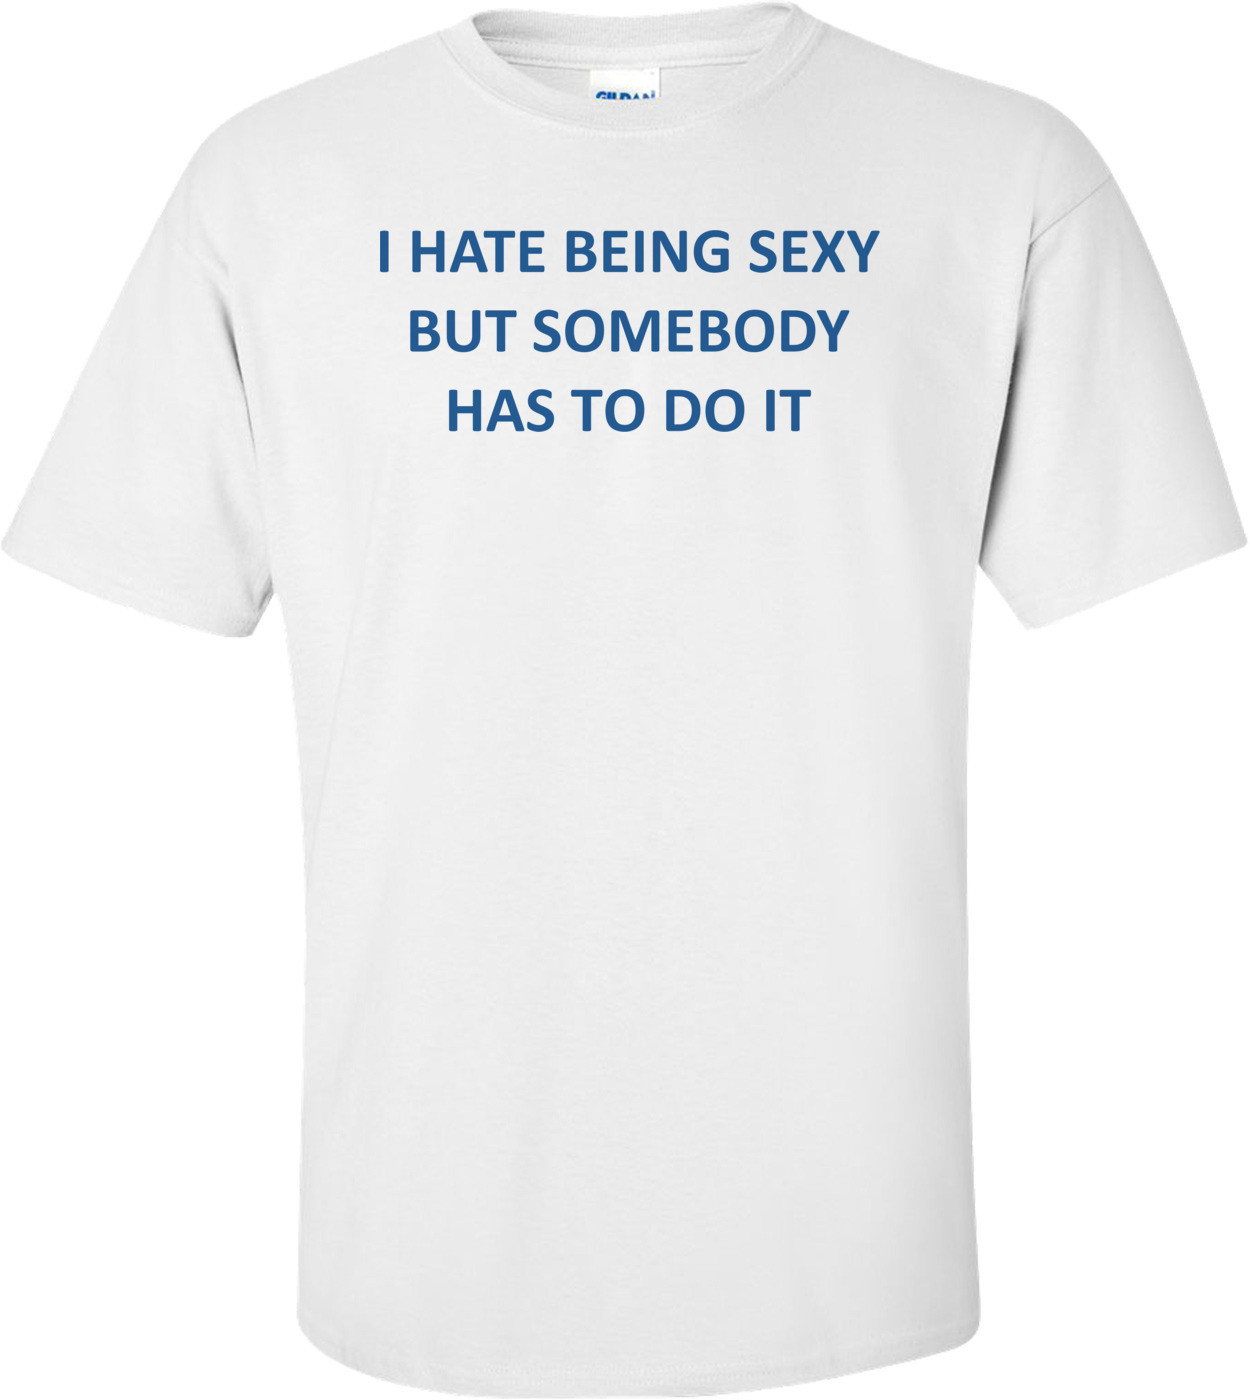 I HATE BEING SEXY BUT SOMEBODY HAS TO DO IT Shirt